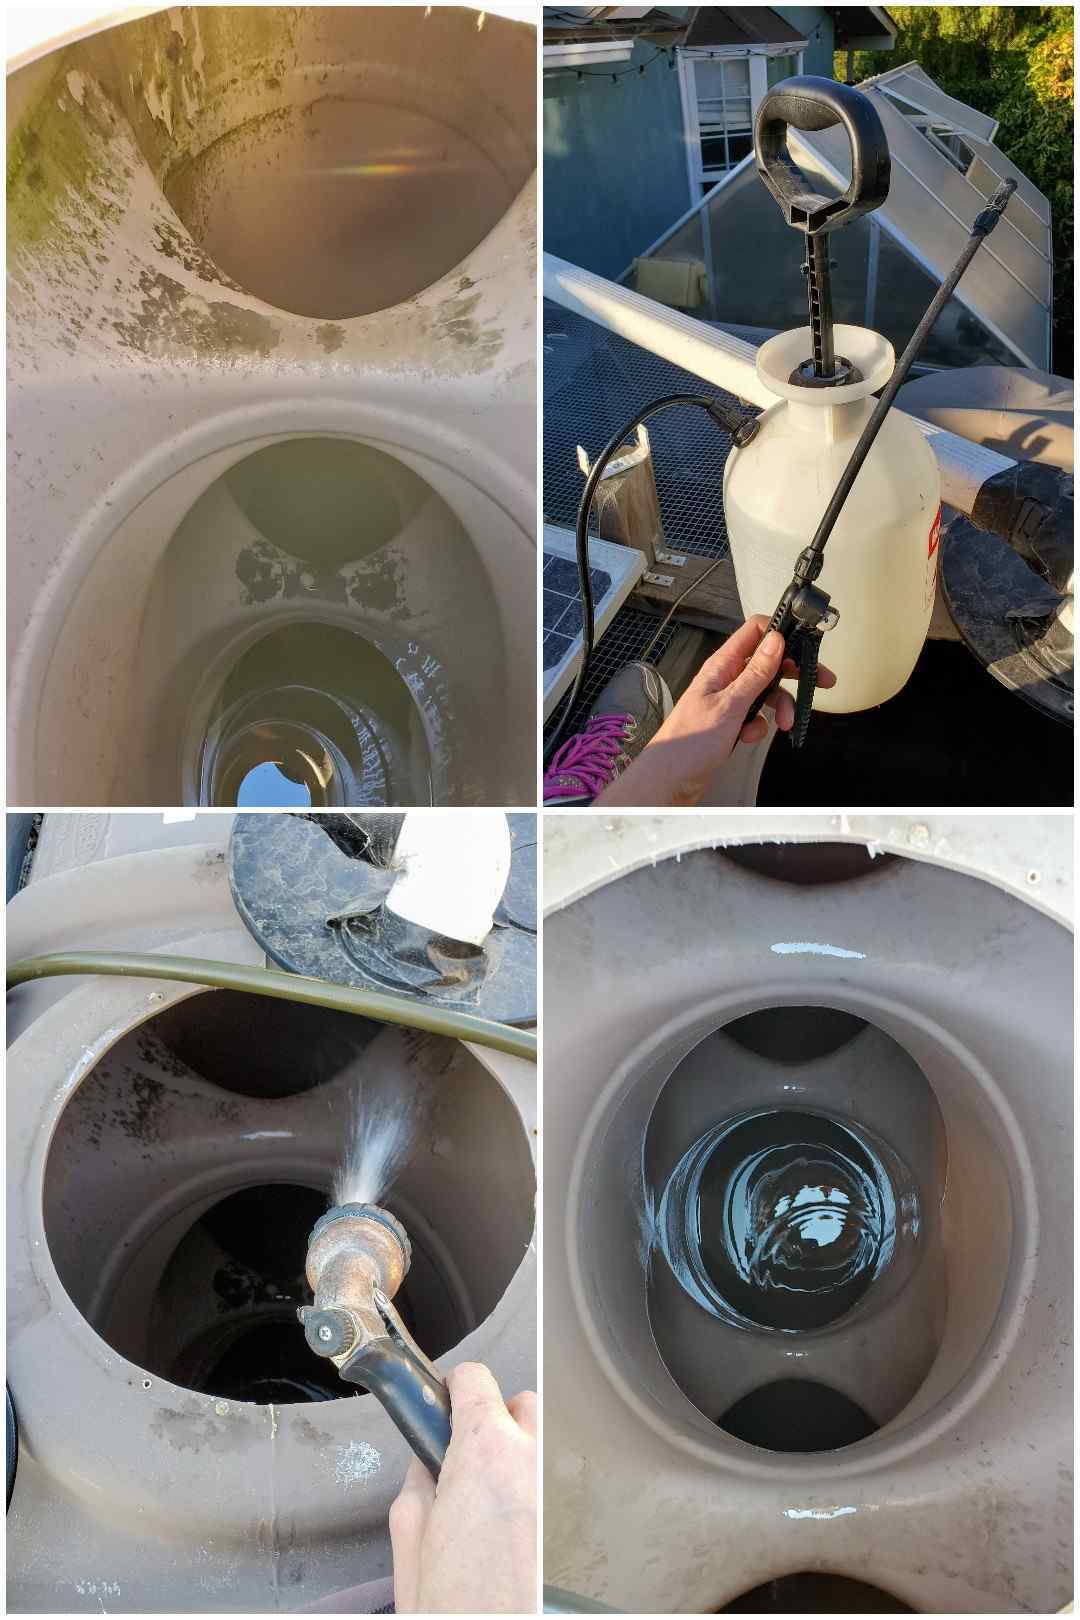 A four part image collage, the first image shows the inside of the rain tank before it has been cleaned. There are collections of algae here and there throughout the inside. The second image shows a person on top of the tank, holding a pump sprayer that has been filled with a dilute bleach mixture. The third image shows a hand spraying down the inside of the tank with a hose to help wash off the bleach spray that was previously applied. The fourth image shows the inside of the tank after it has been cleaned, there isn't a lot of algae growth left, most of it being removed in the cleaning process.  It is now ready for rainwater collection. 